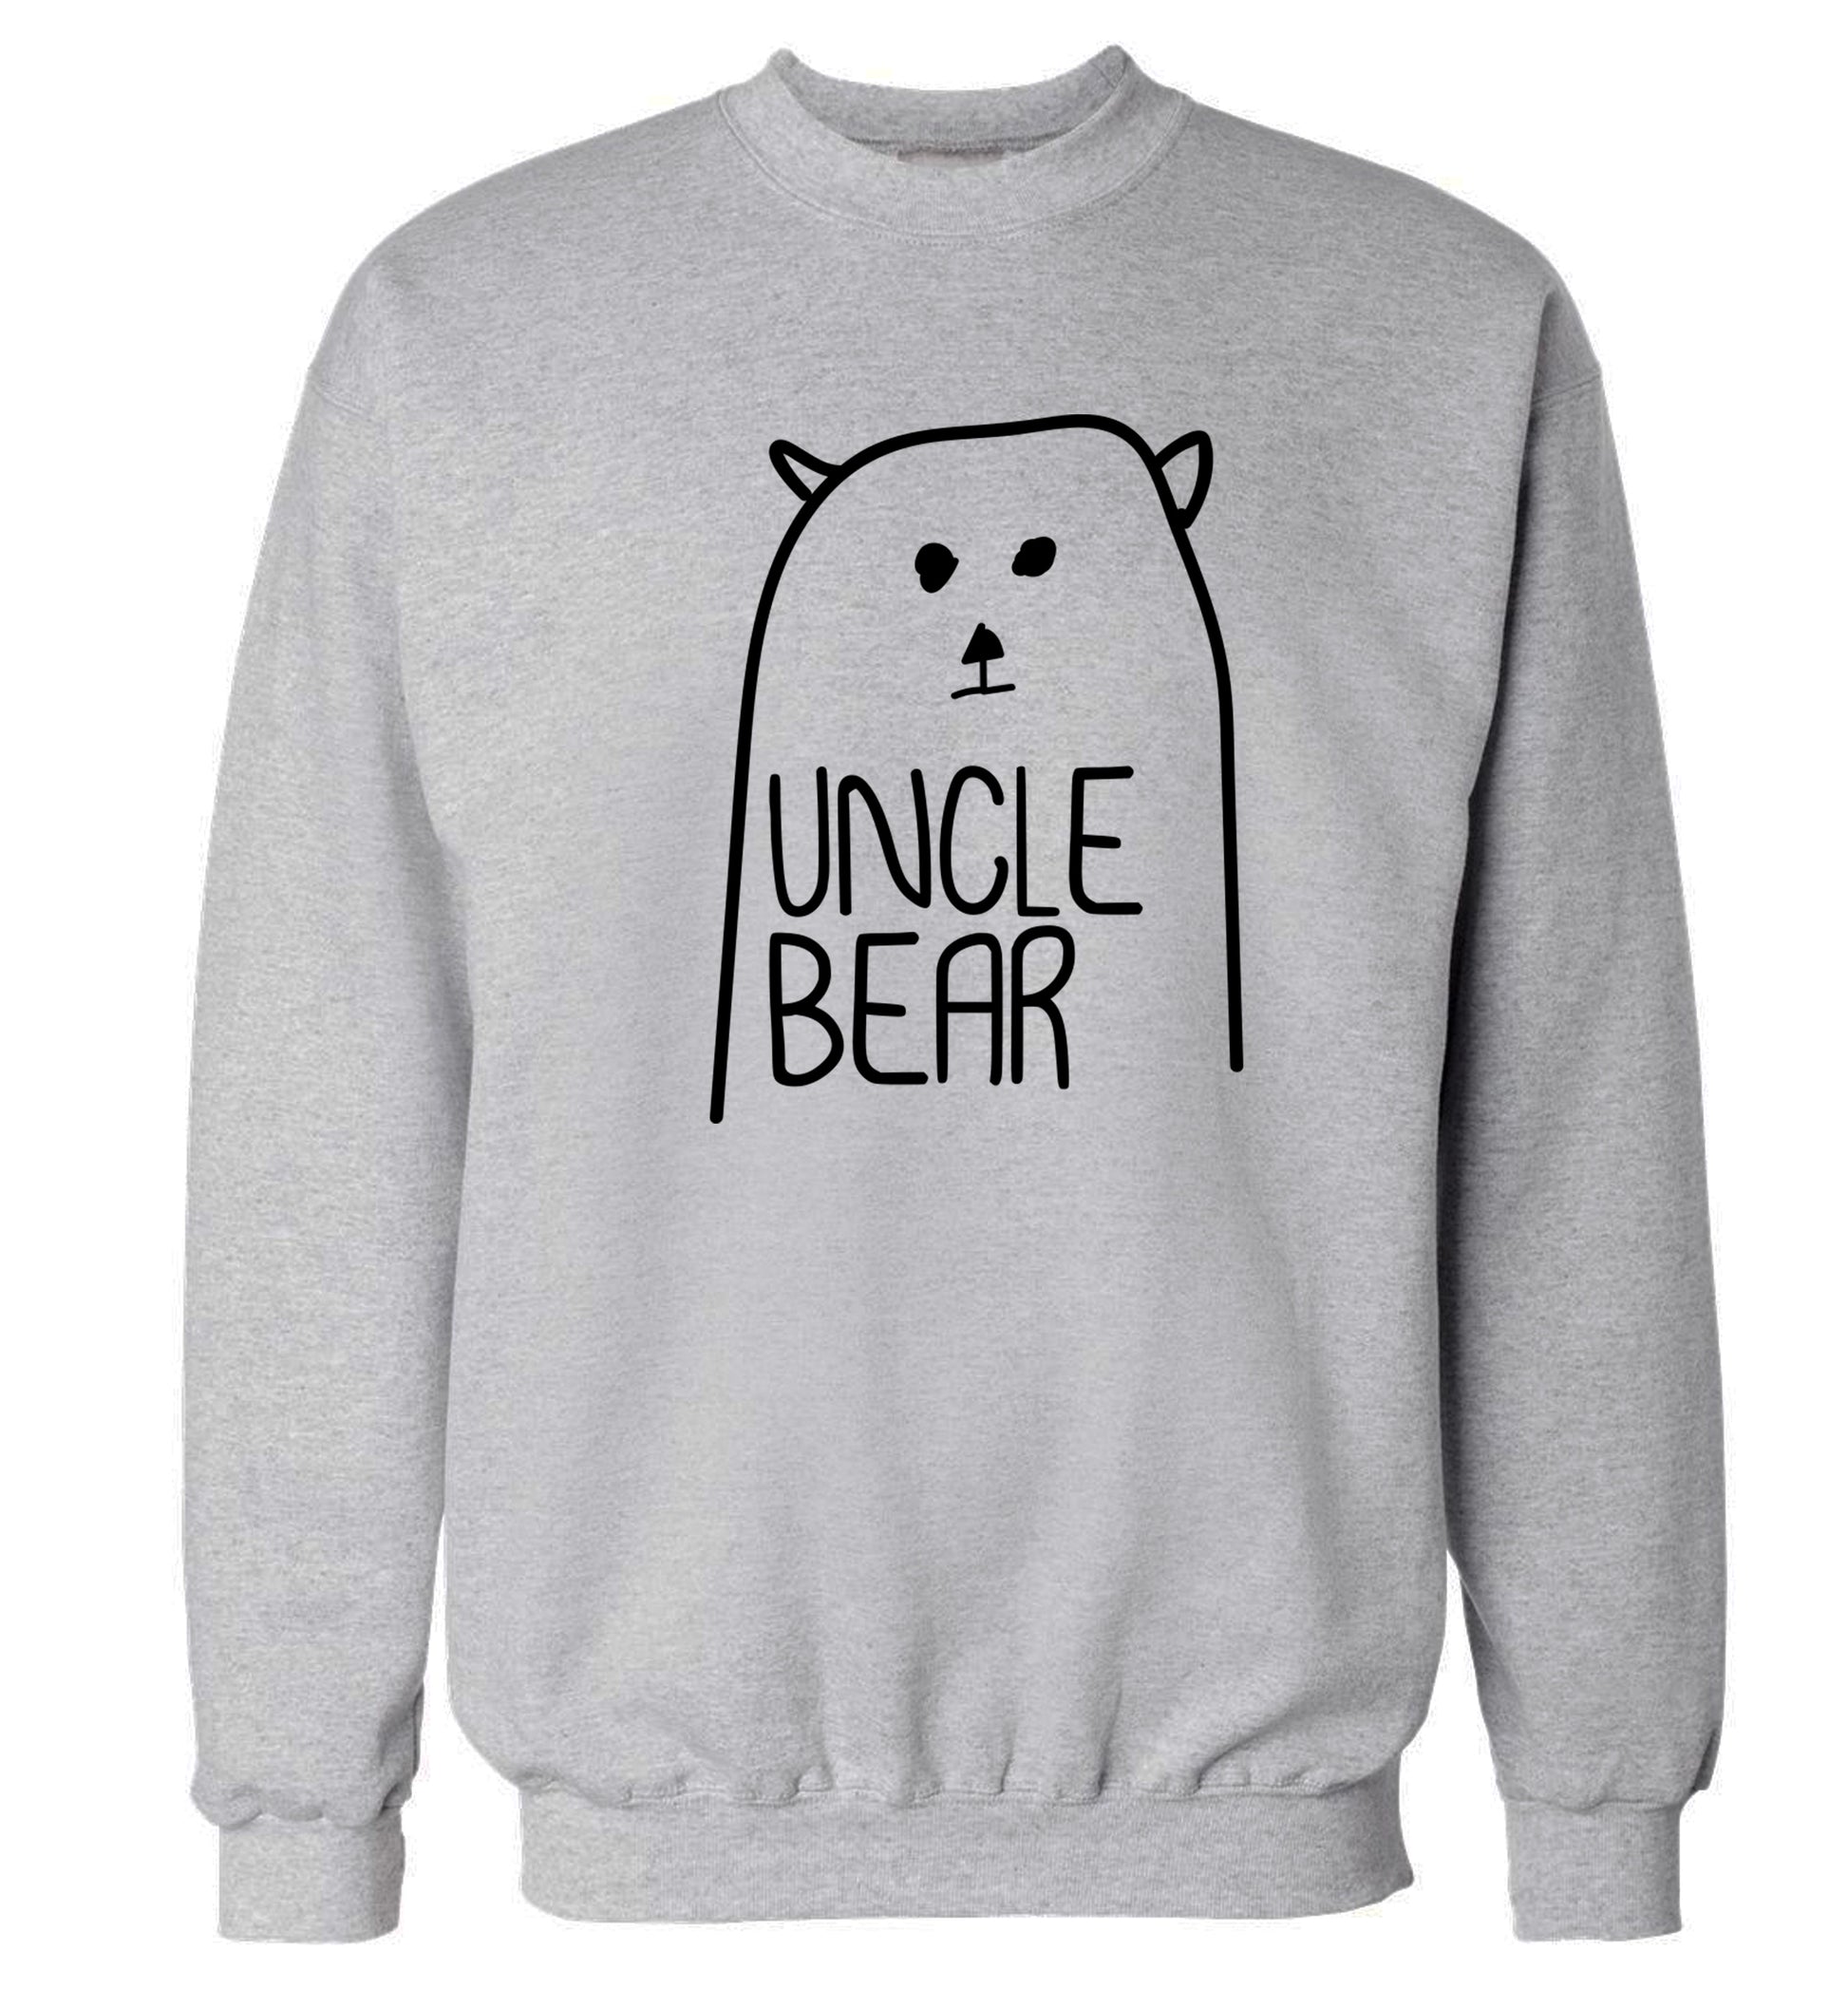 Uncle bear Adult's unisex grey Sweater 2XL